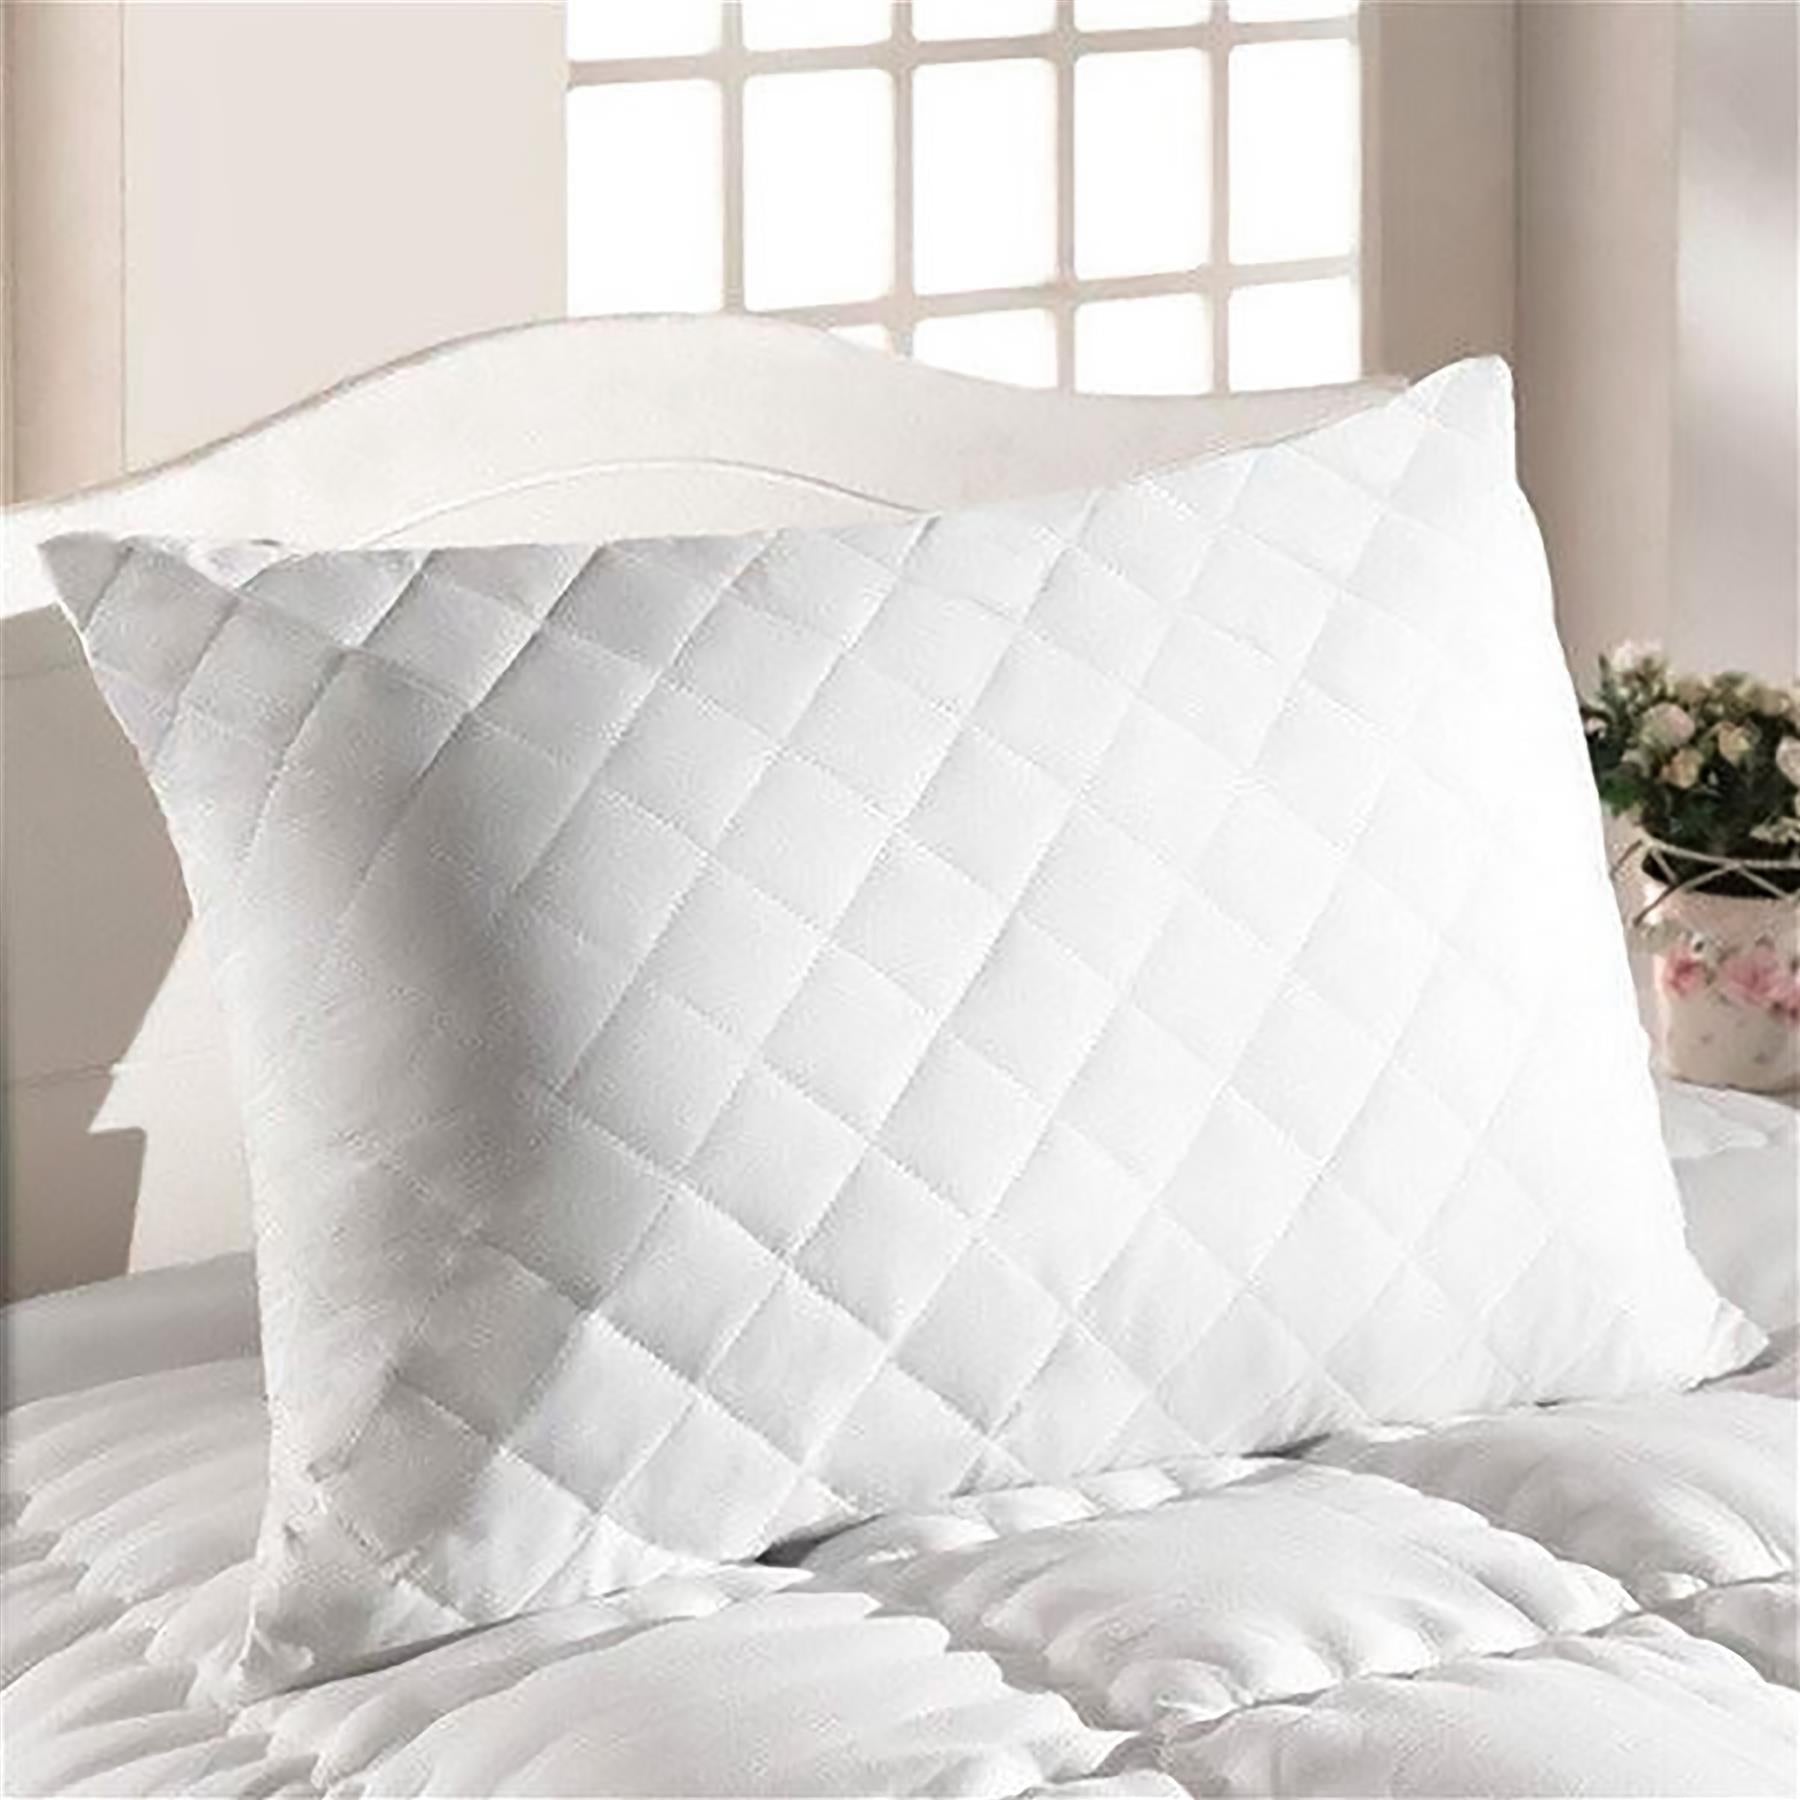 A2Z Quilted Mattress Protectors Soft Luxurious Single Double King Super King